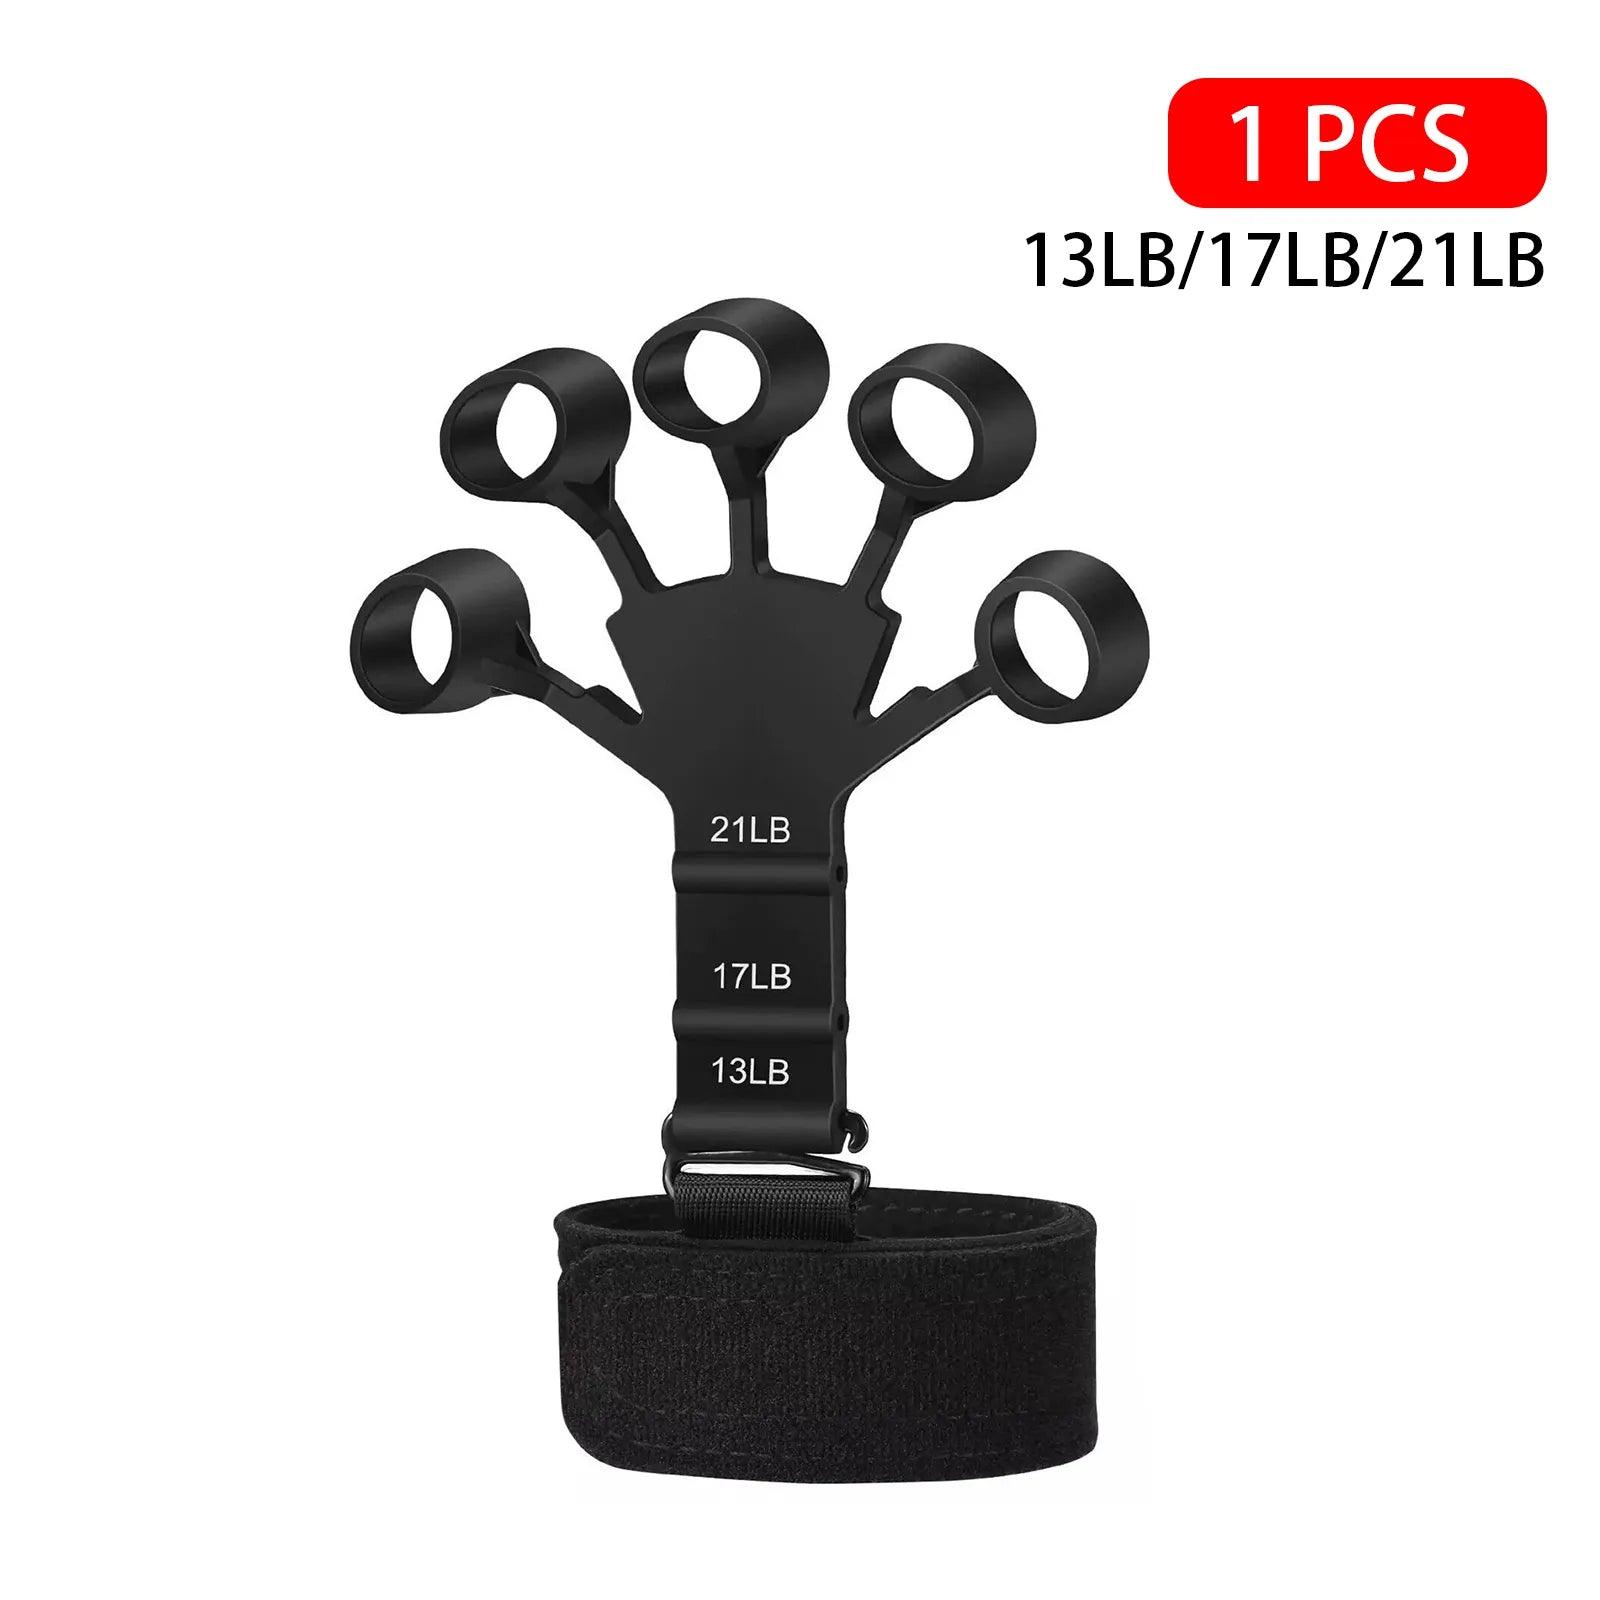 Hand Grip Strengthener Forearm Strength Sport Muscle Recovery Training Gripster Rehabilitation Accessories Expander Fitness Gym - Ammpoure Wellbeing